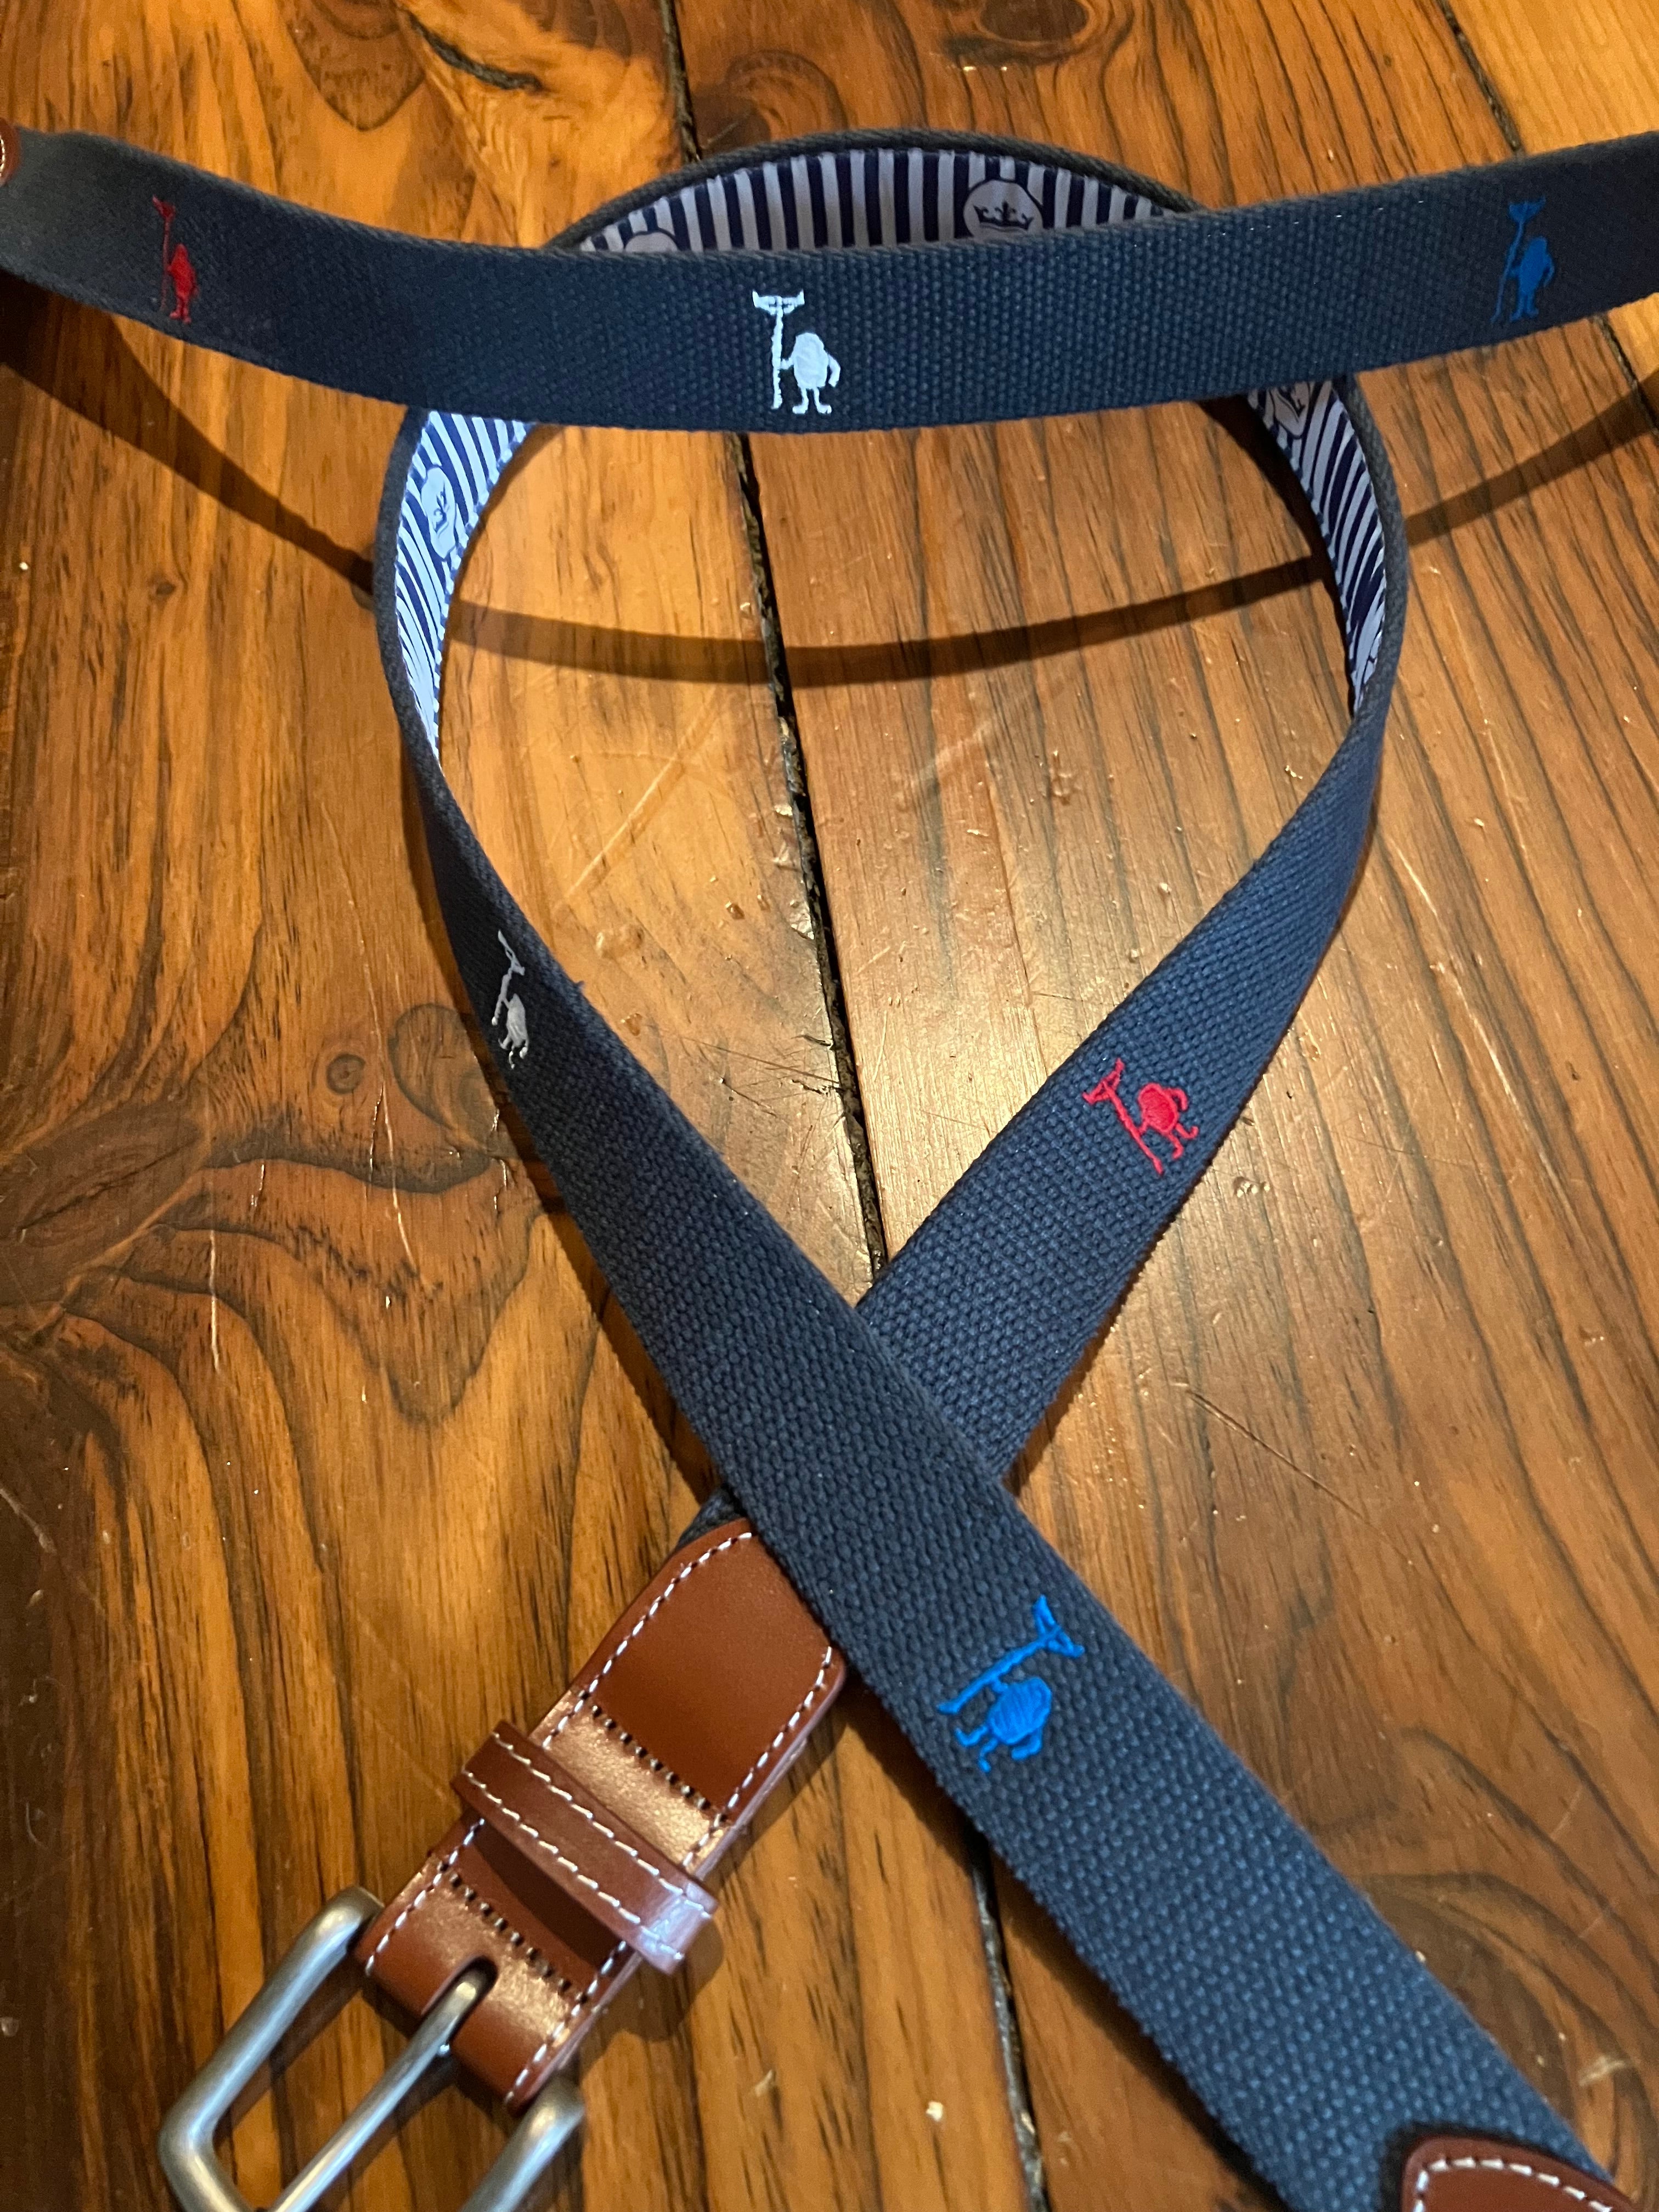 Caveman Belt by Peter Millar in Red, White and Blue